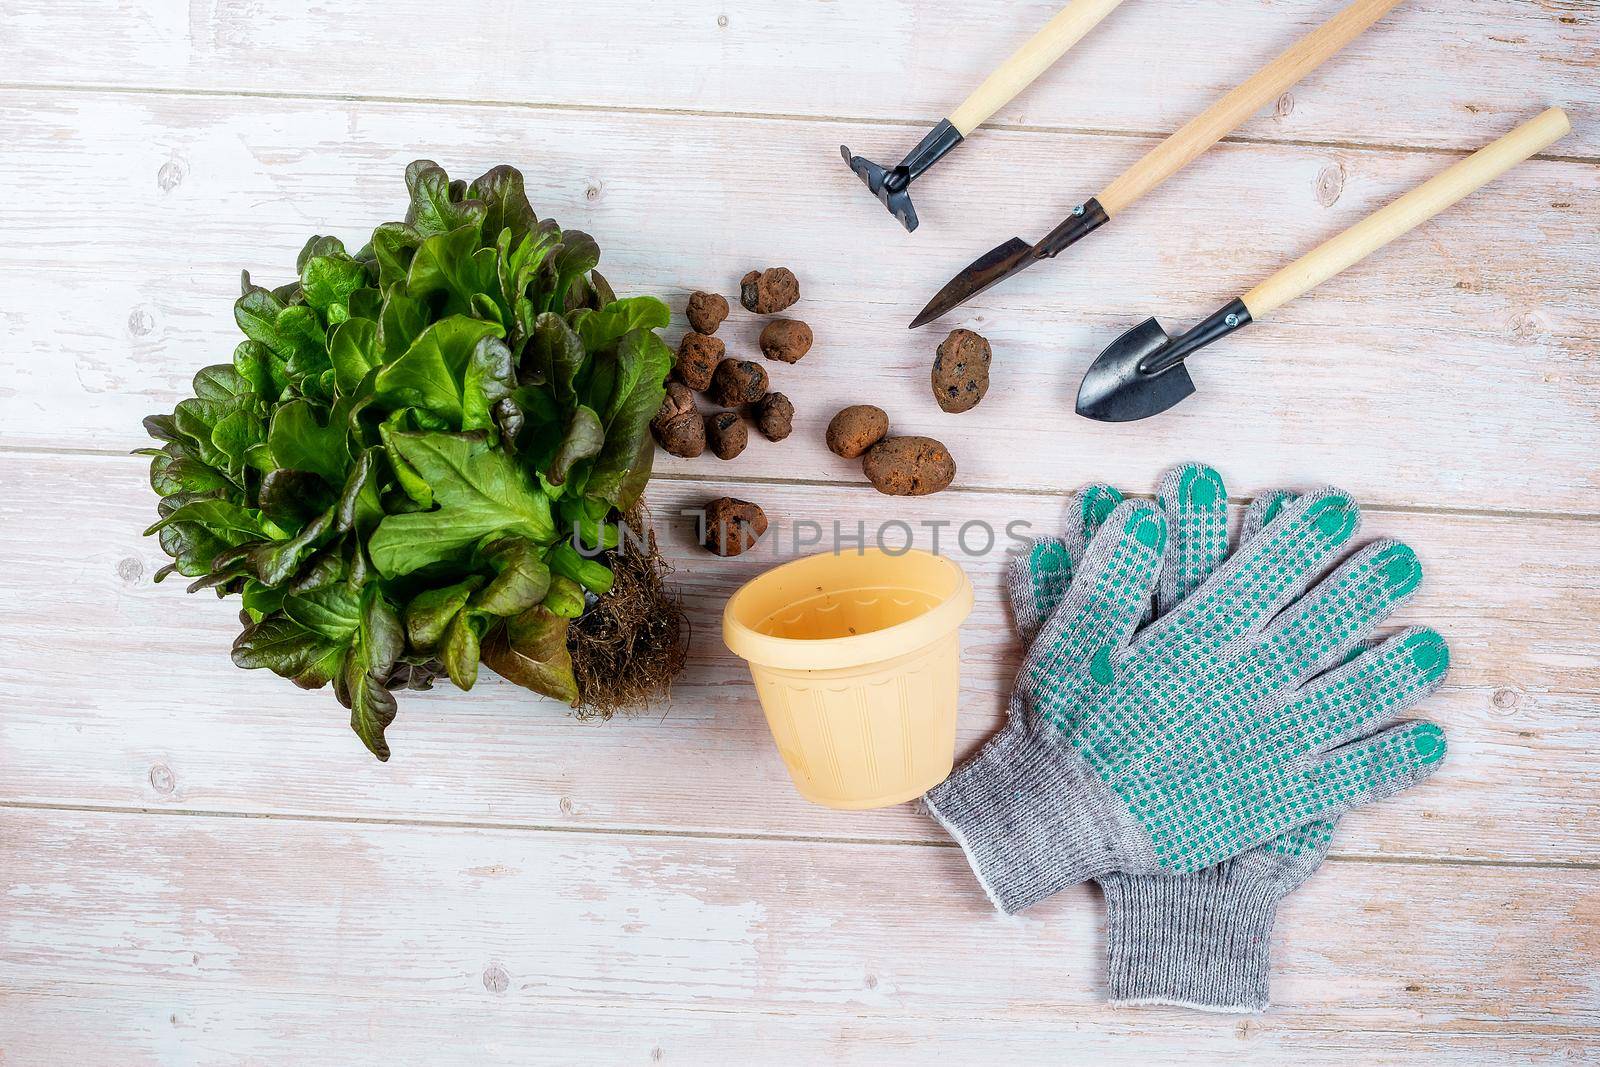 A green plant for replanting, a flower pot, expanded clay, gardening tools and gloves are laid out on a wooden table. Home gardening concept.